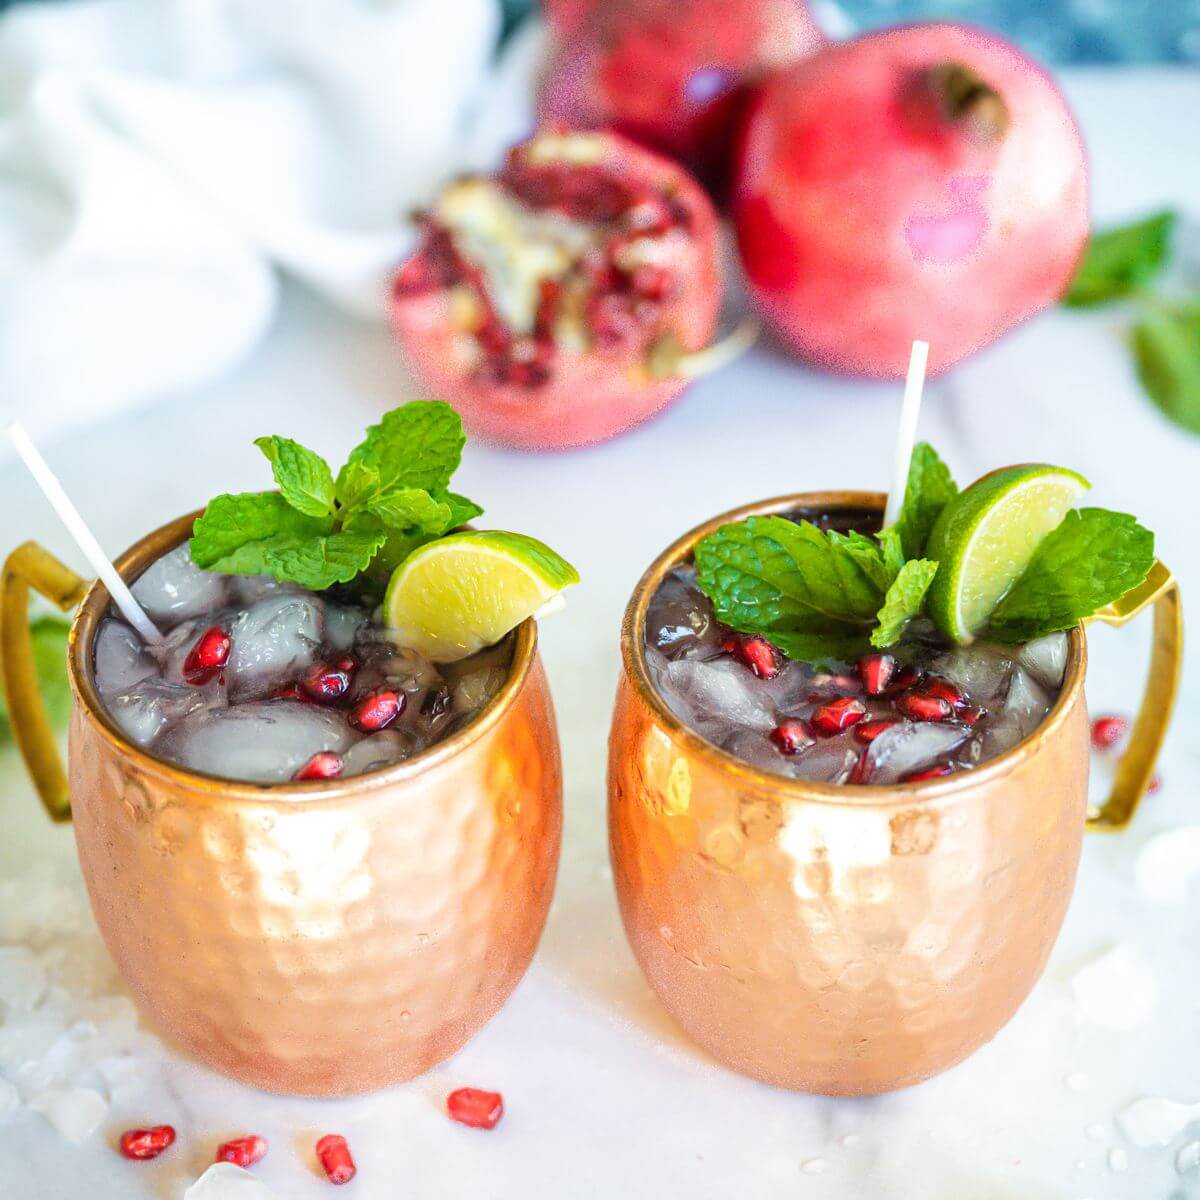 https://www.thefreshcooky.com/wp-content/uploads/2017/02/Pomegranate-moscow-mule-square-2.jpg